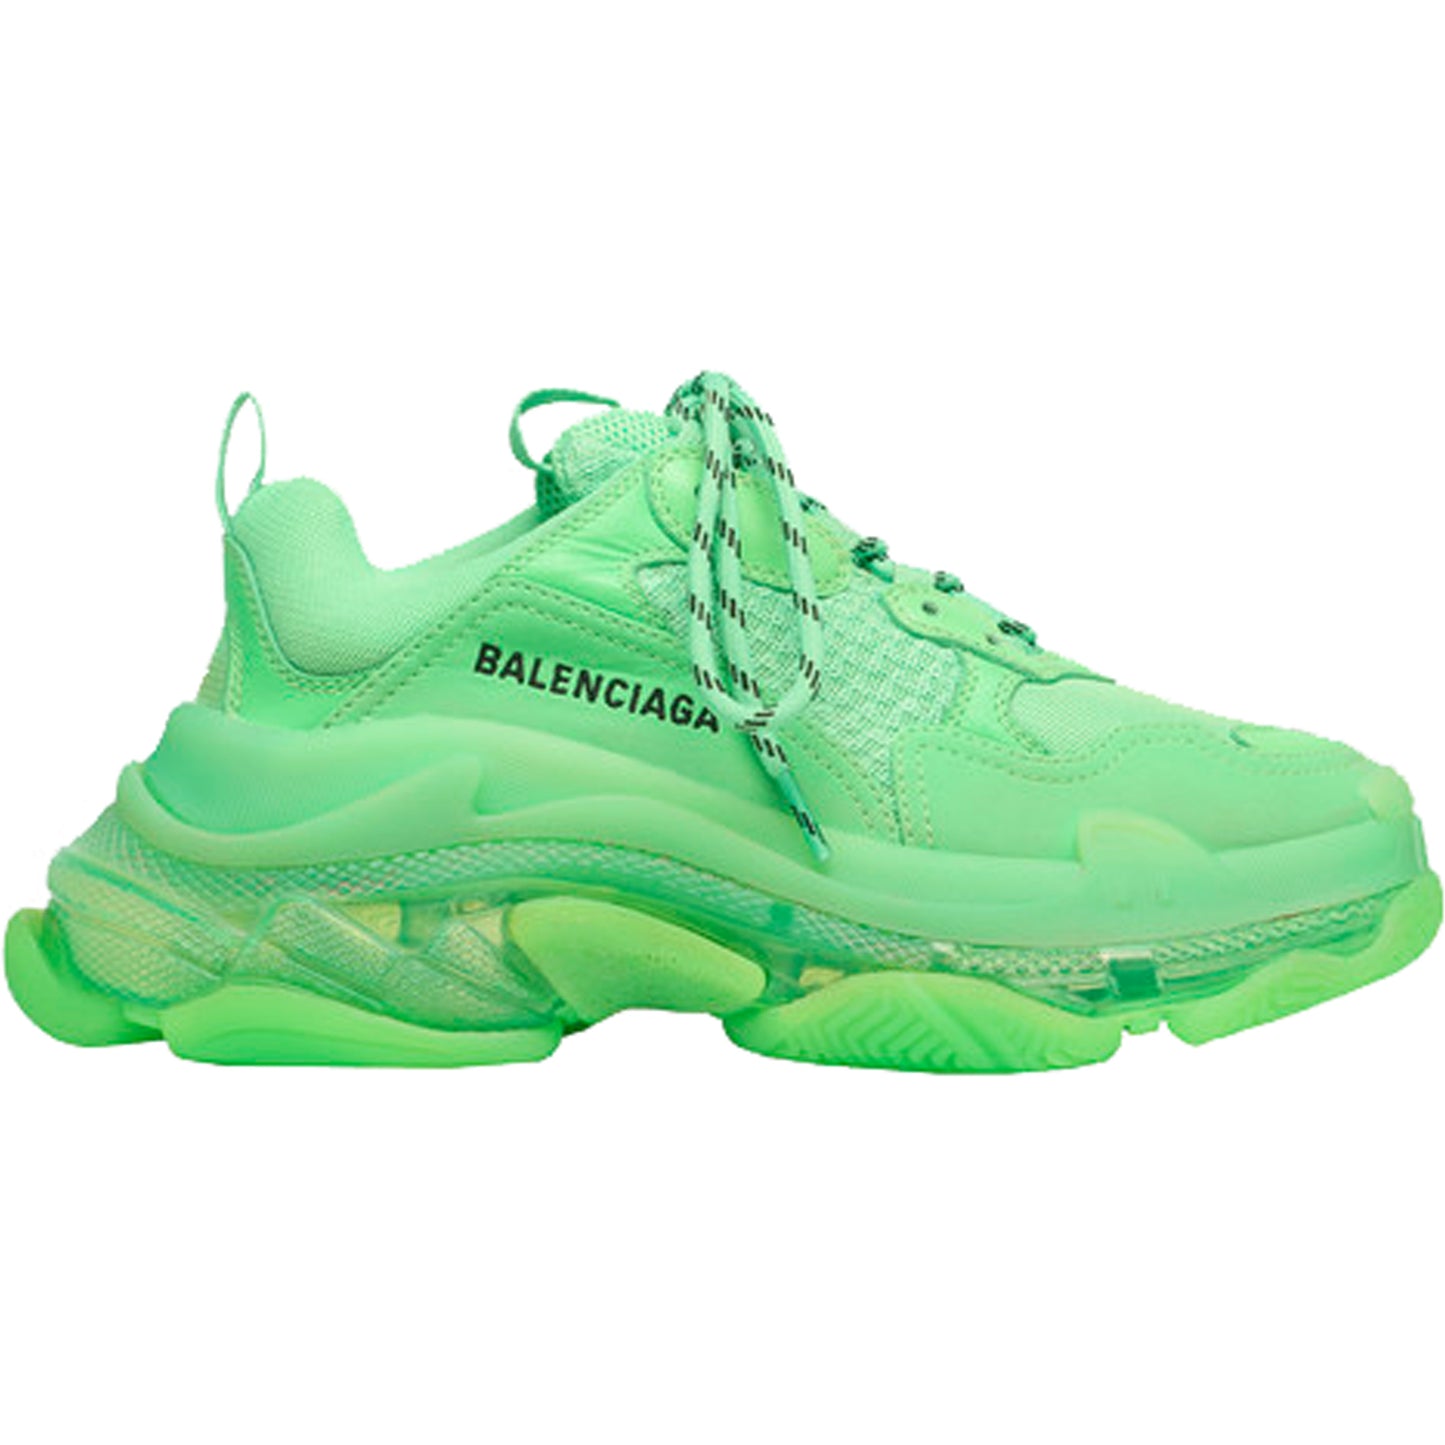 Triple s Neon green clear sole - whatever on 